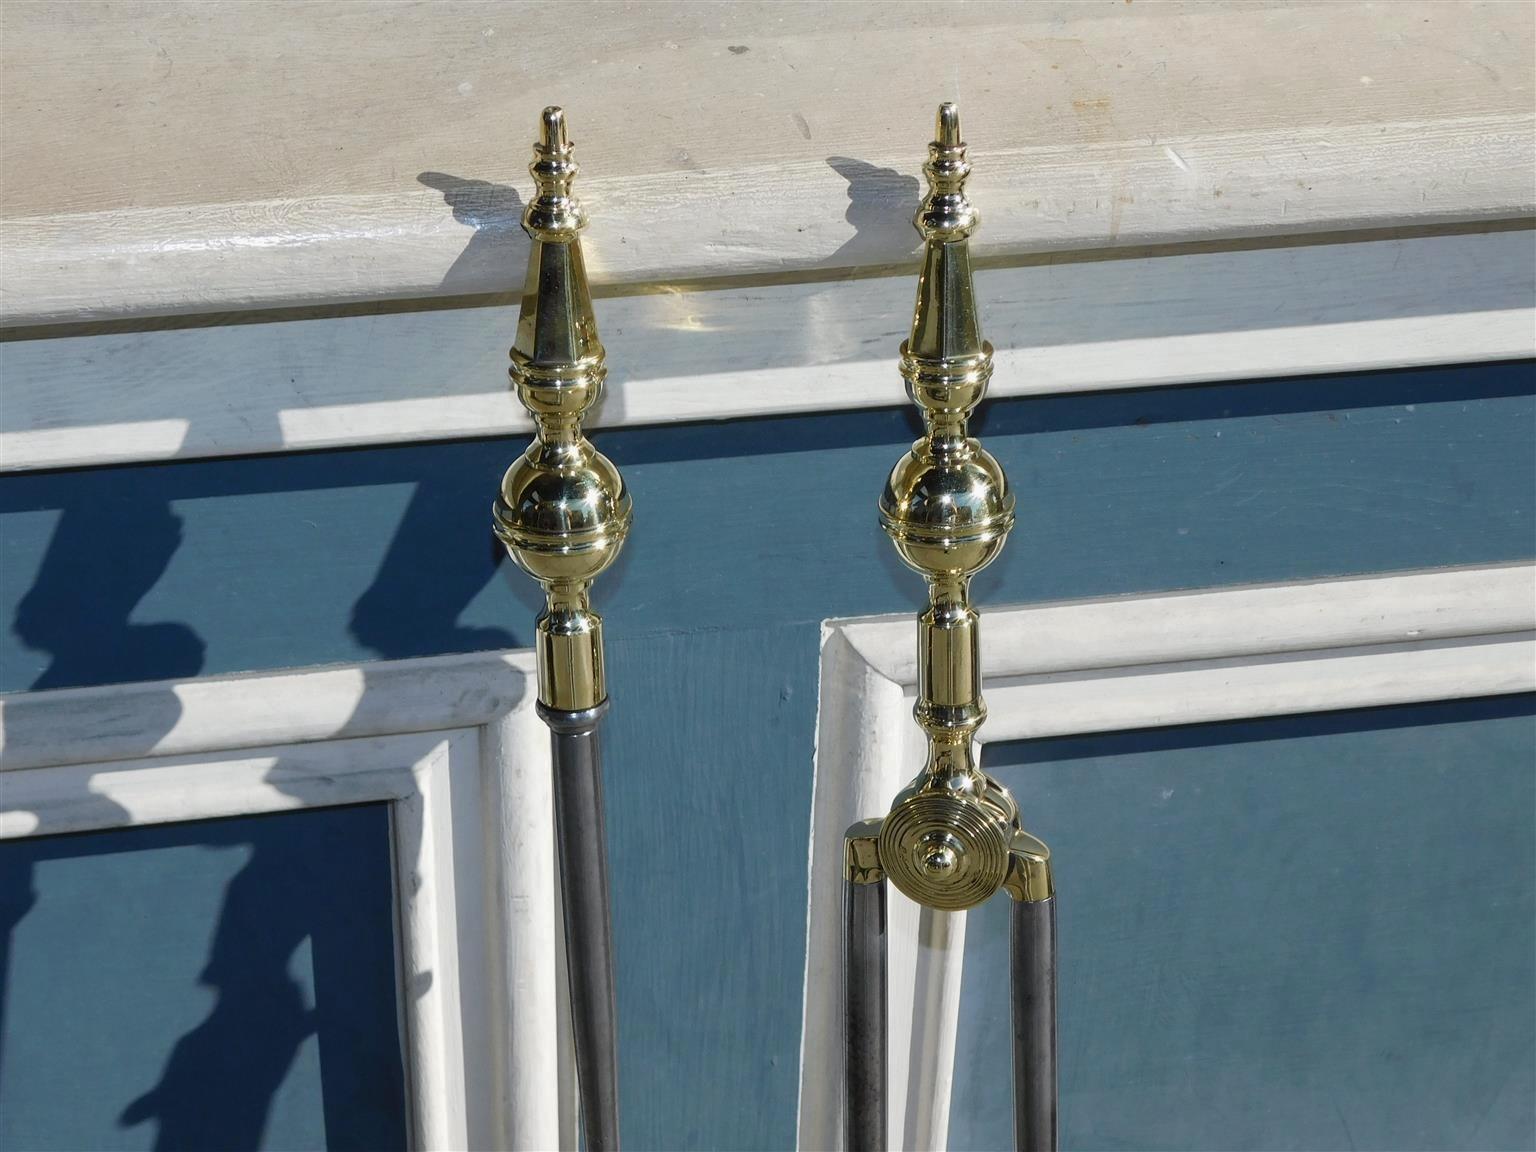 American Colonial Pair of American Brass and Polished Steel Steeple Top Finial Fire Tools, C. 1800 For Sale